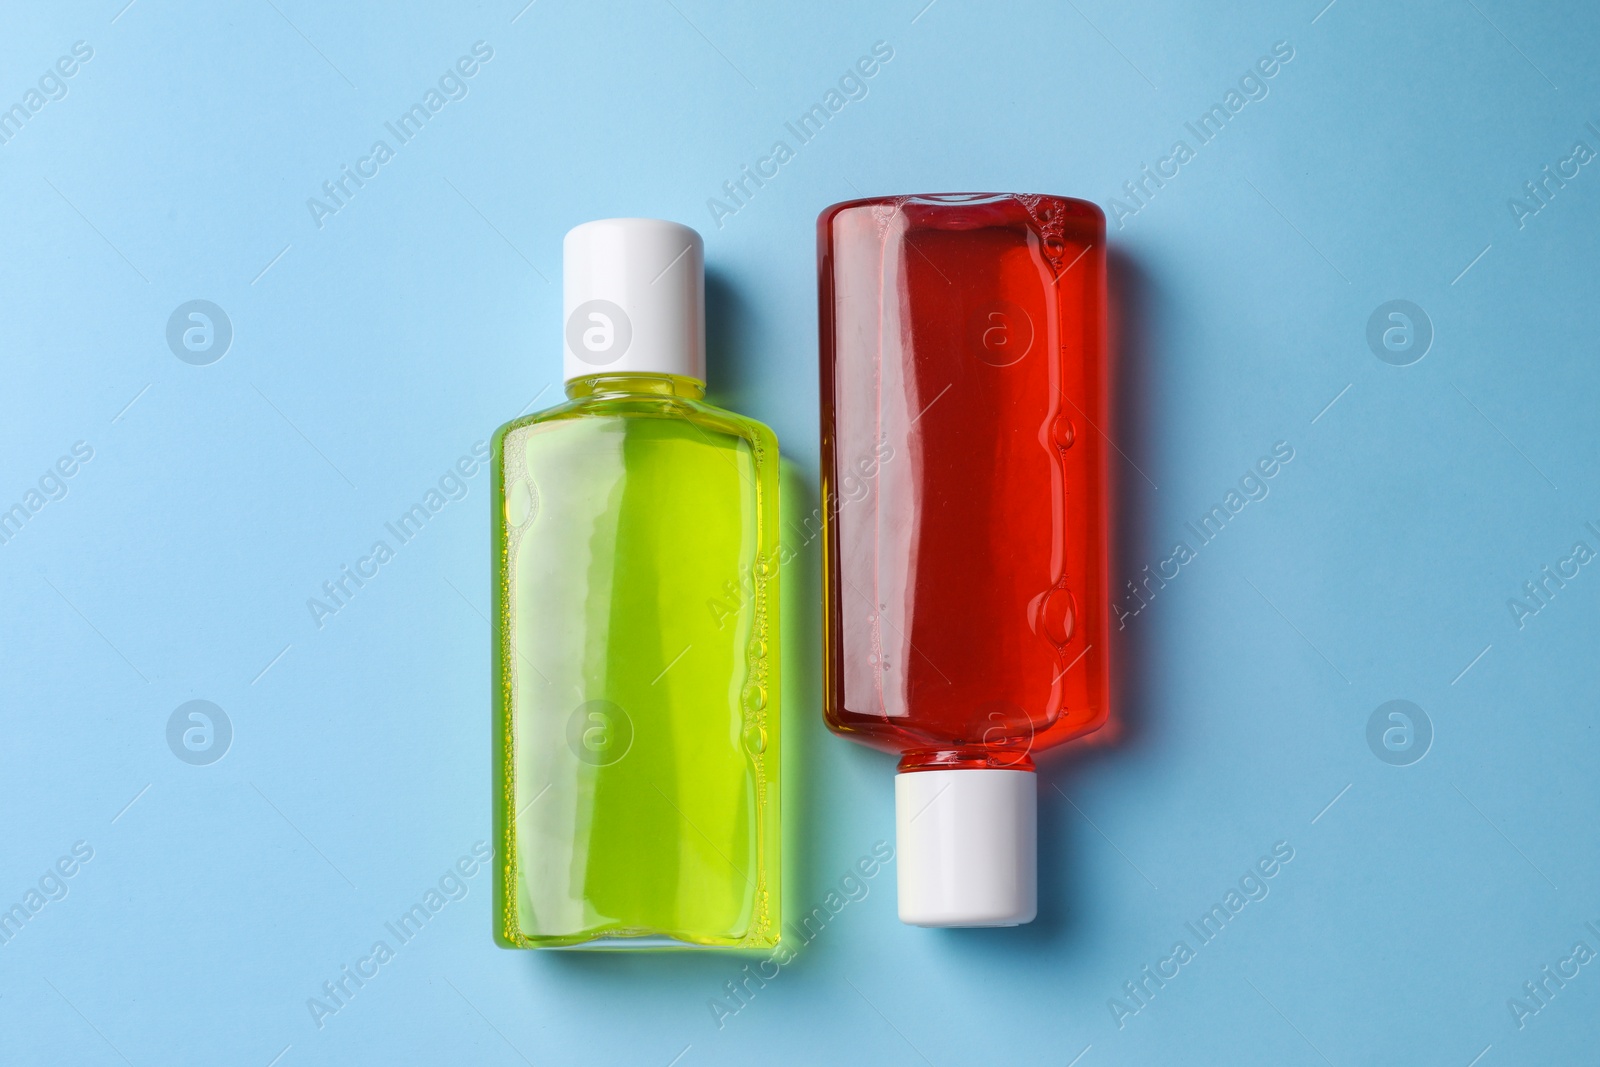 Photo of Fresh mouthwashes in bottles on light blue background, top view